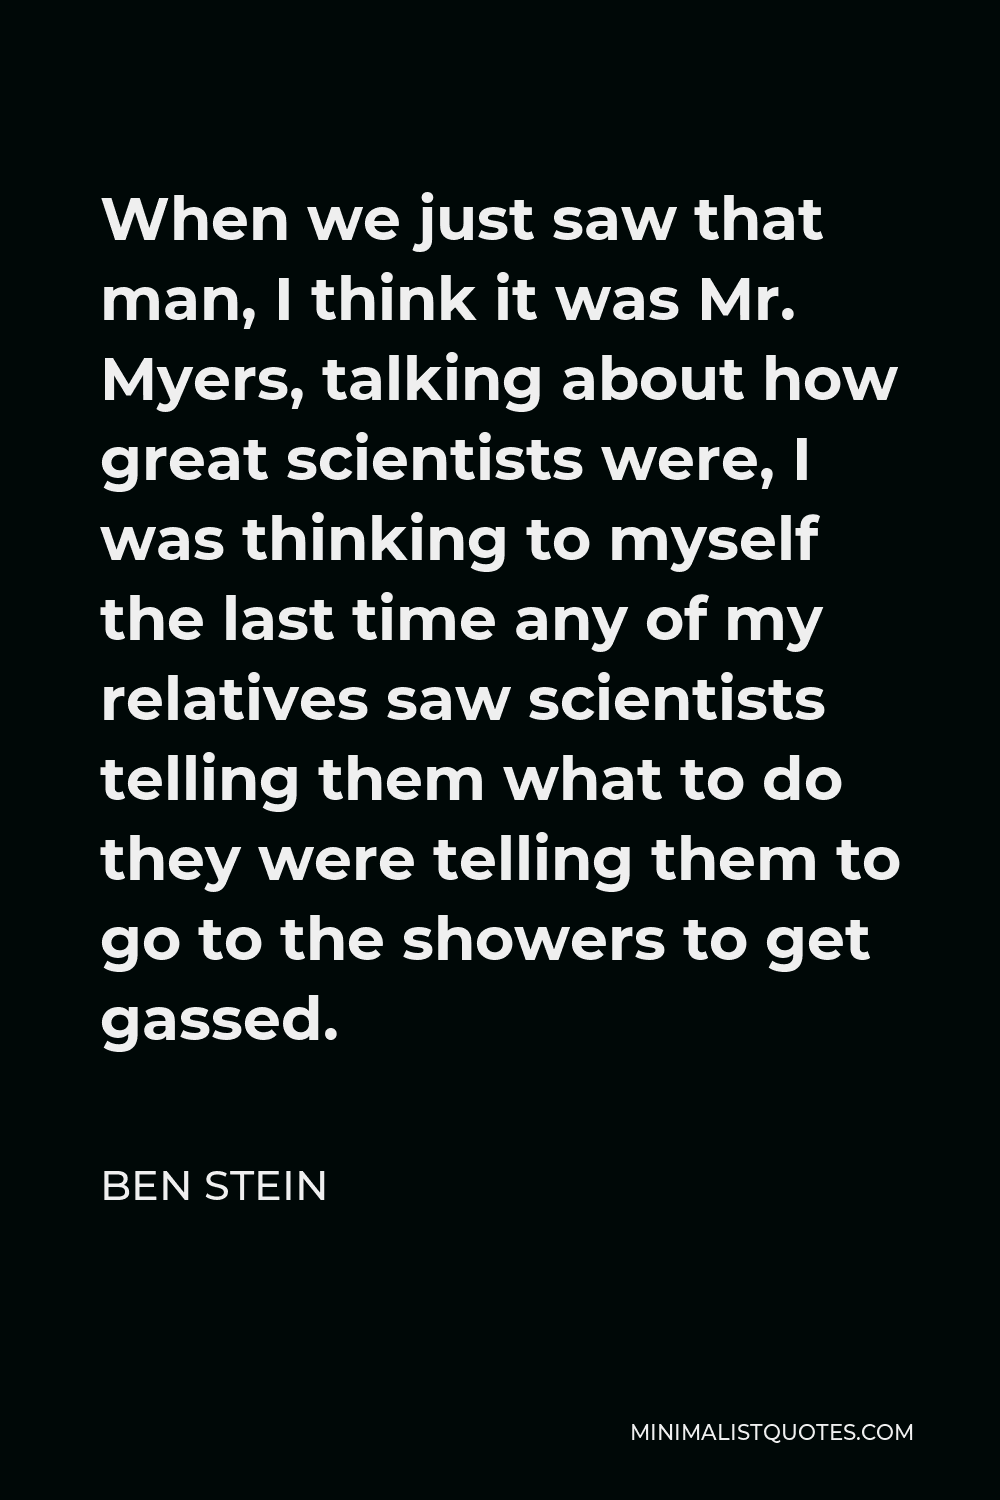 Ben Stein Quote - When we just saw that man, I think it was Mr. Myers, talking about how great scientists were, I was thinking to myself the last time any of my relatives saw scientists telling them what to do they were telling them to go to the showers to get gassed.